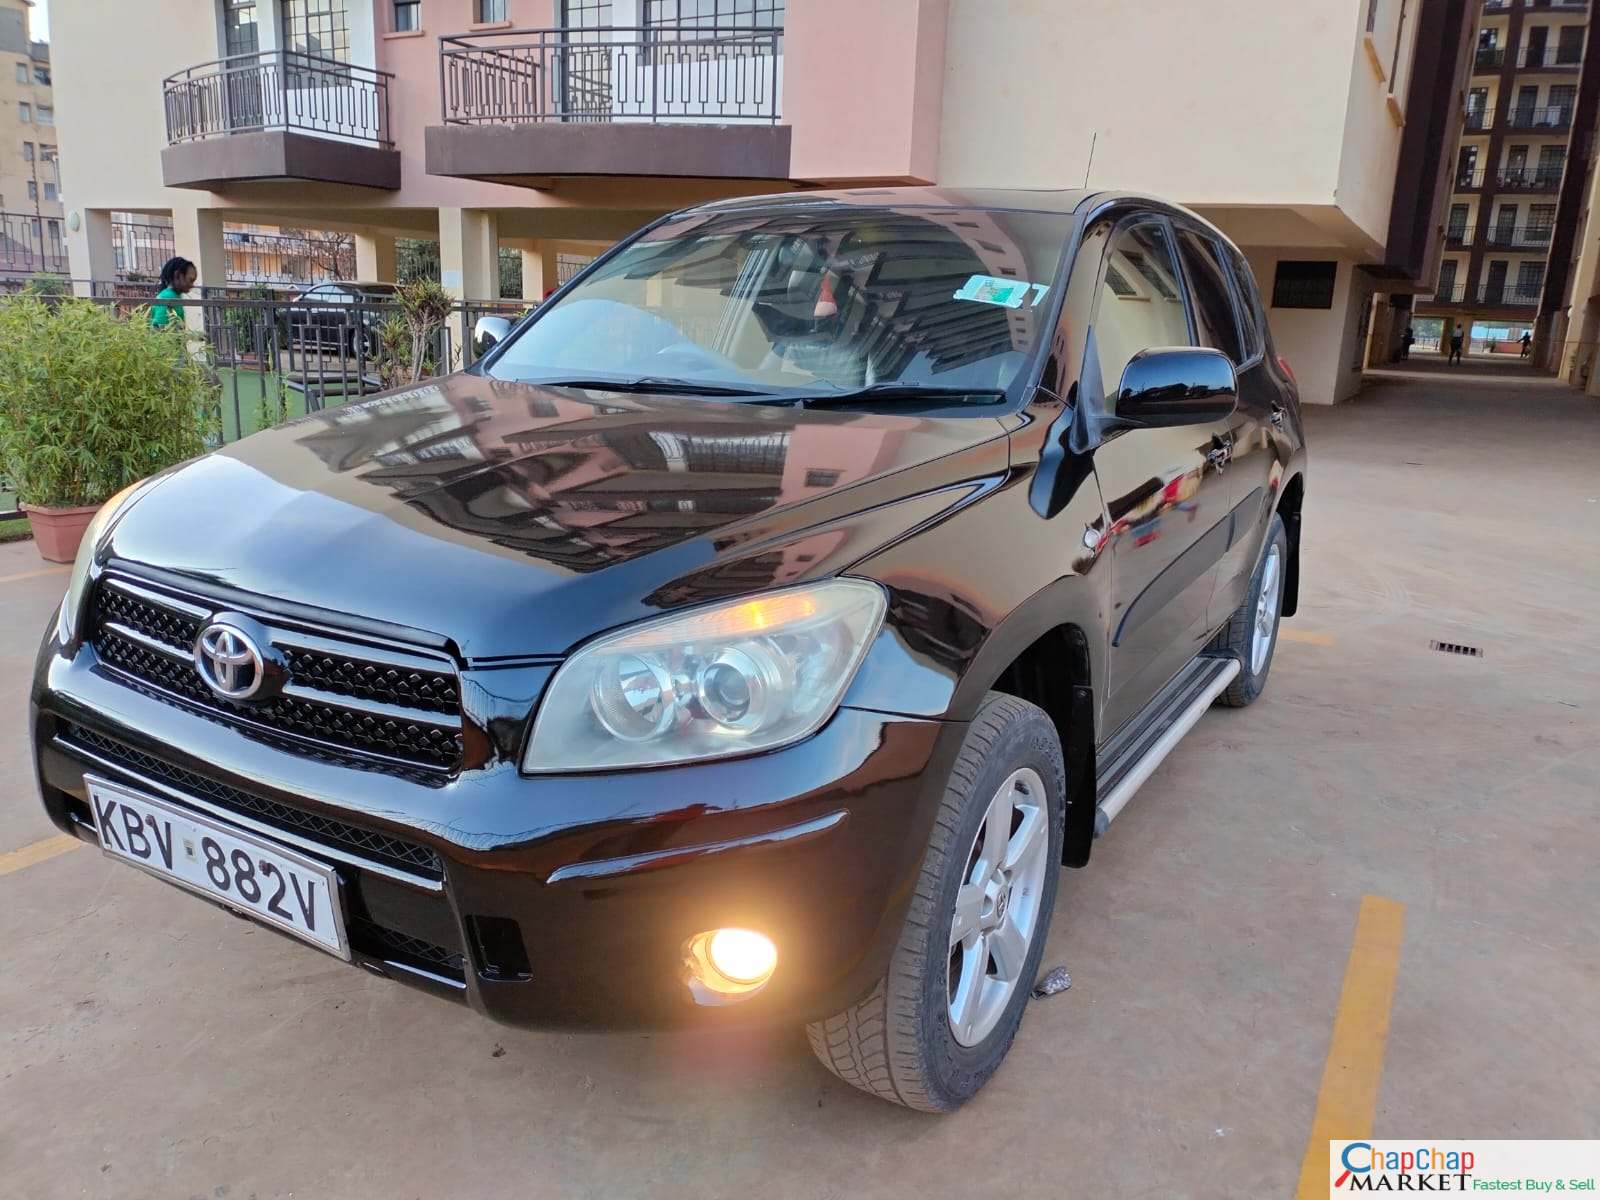 Cars Cars For Sale-Toyota RAV4 kenya You Pay 30% Deposit Trade in OK Toyota RAV4 for sale in kenya hire purchase installments EXCLUSIVE 9